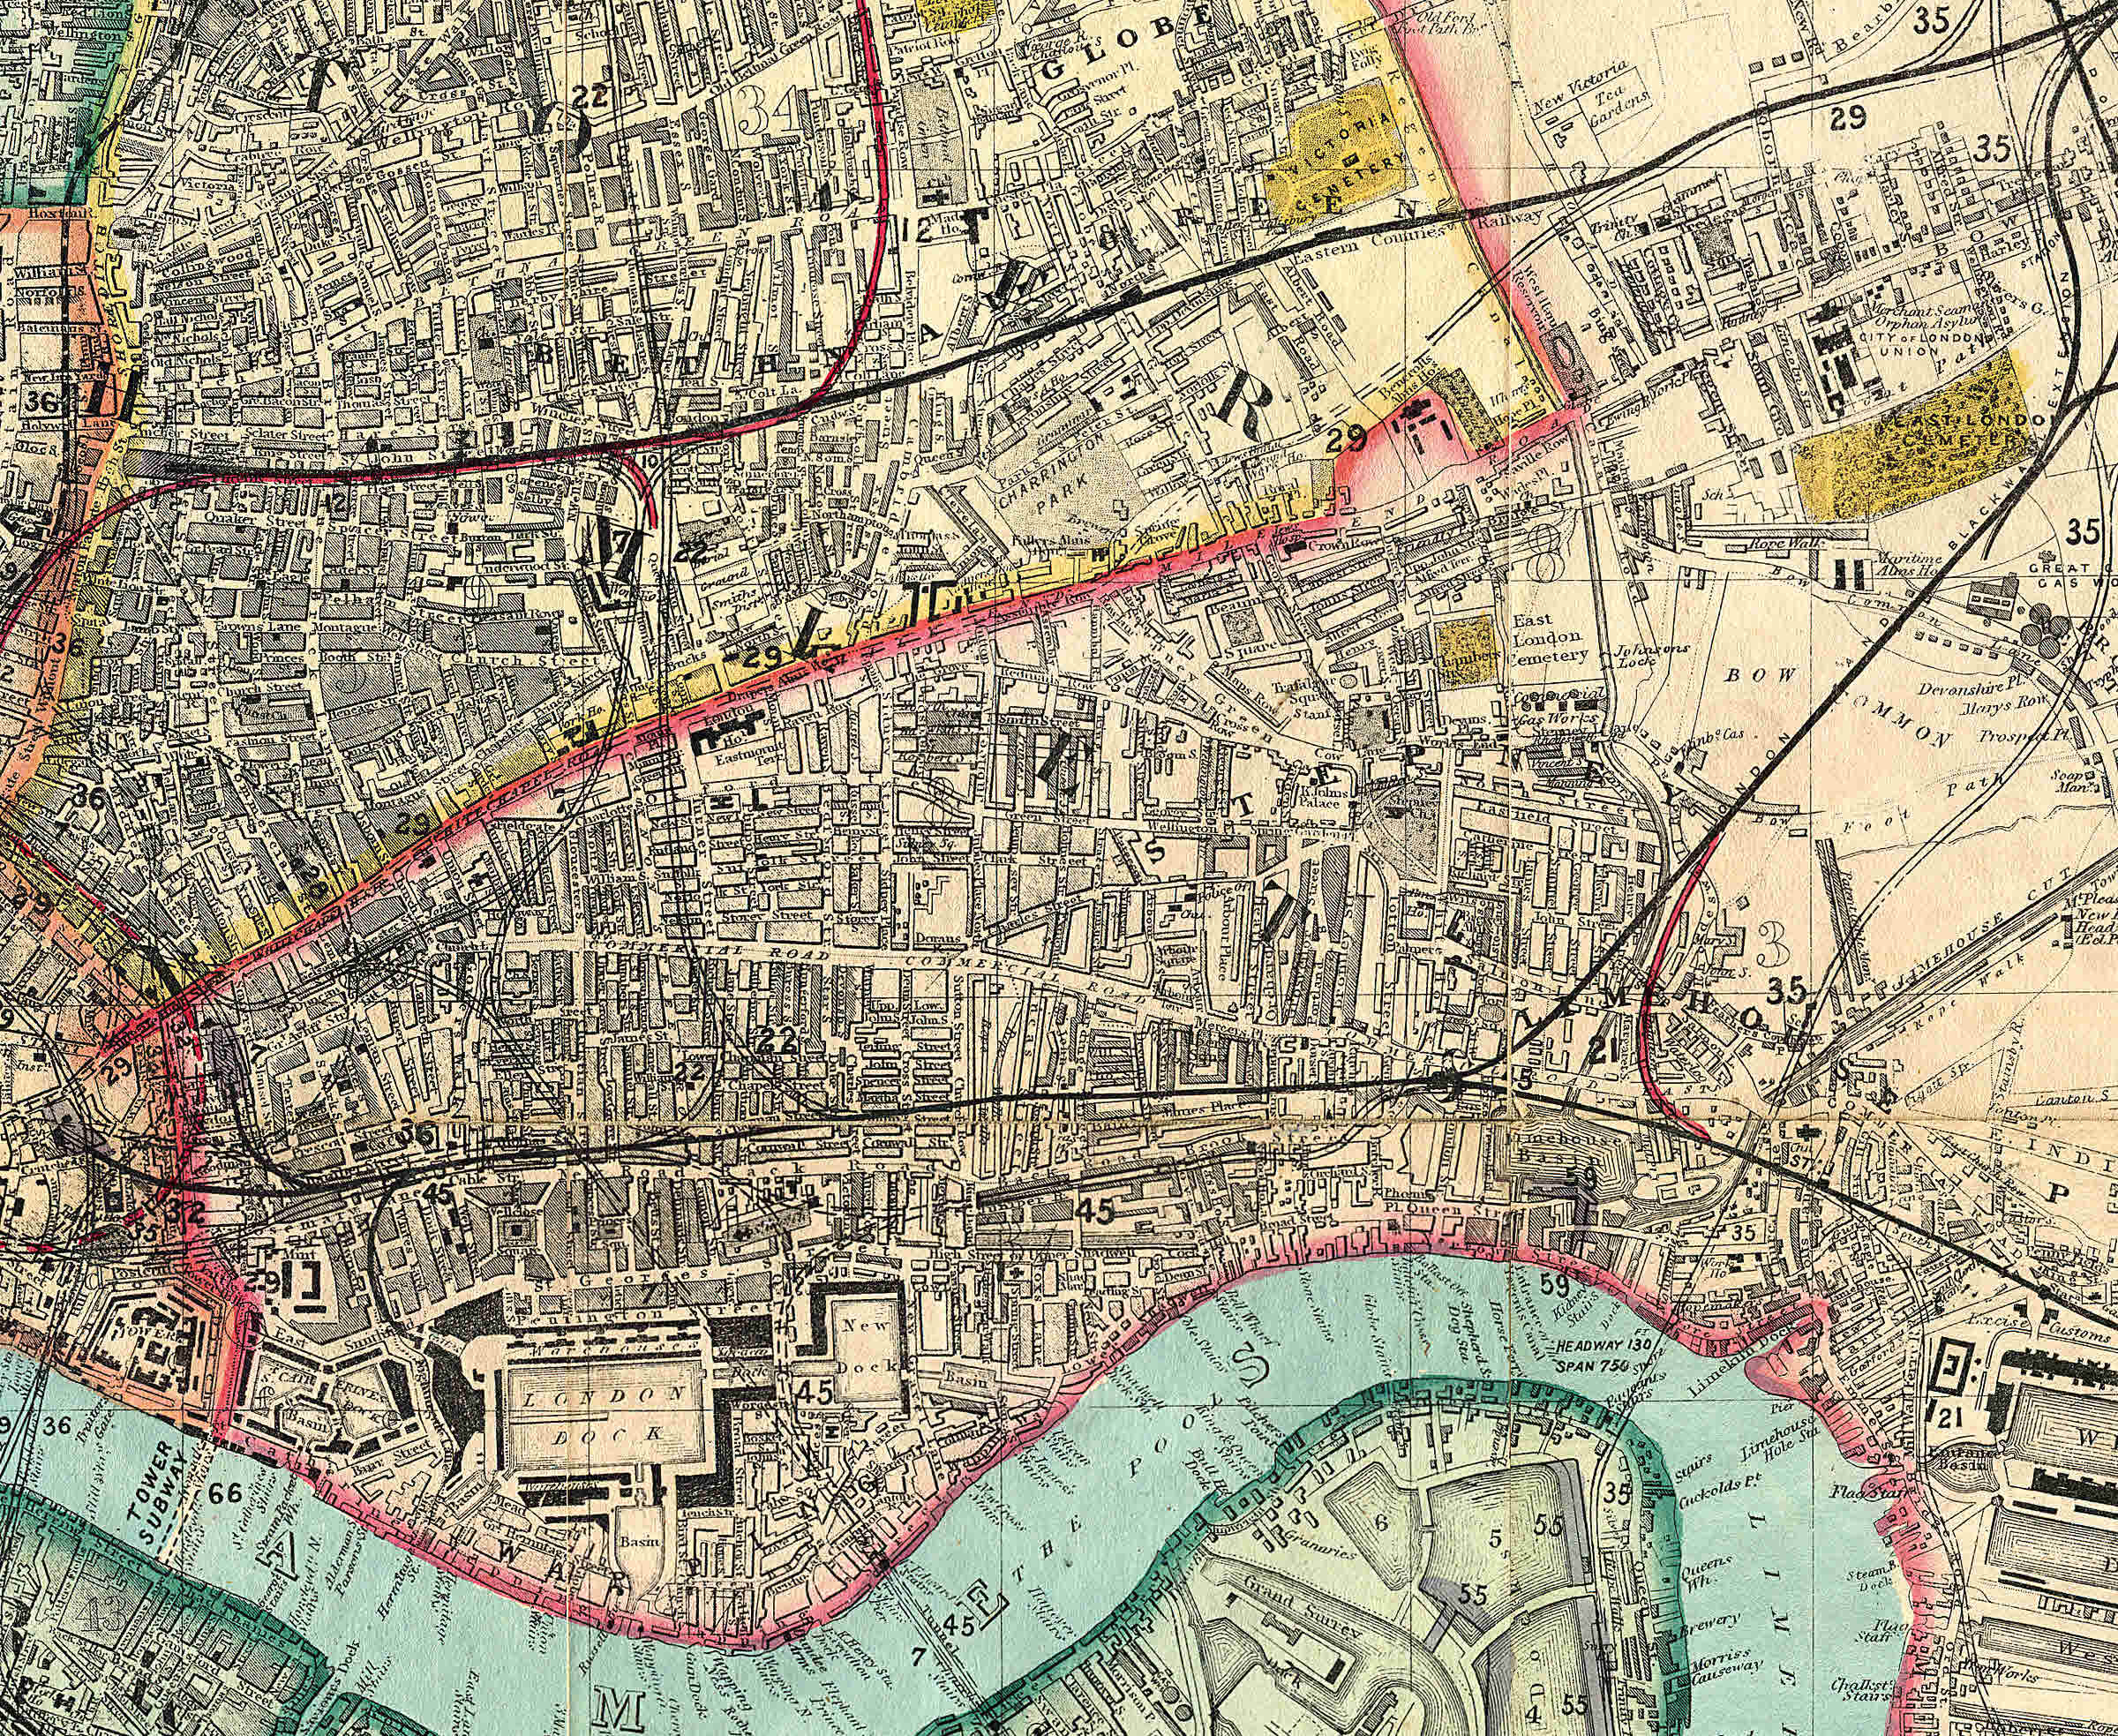 1864 - Wyld, "New Map of London"